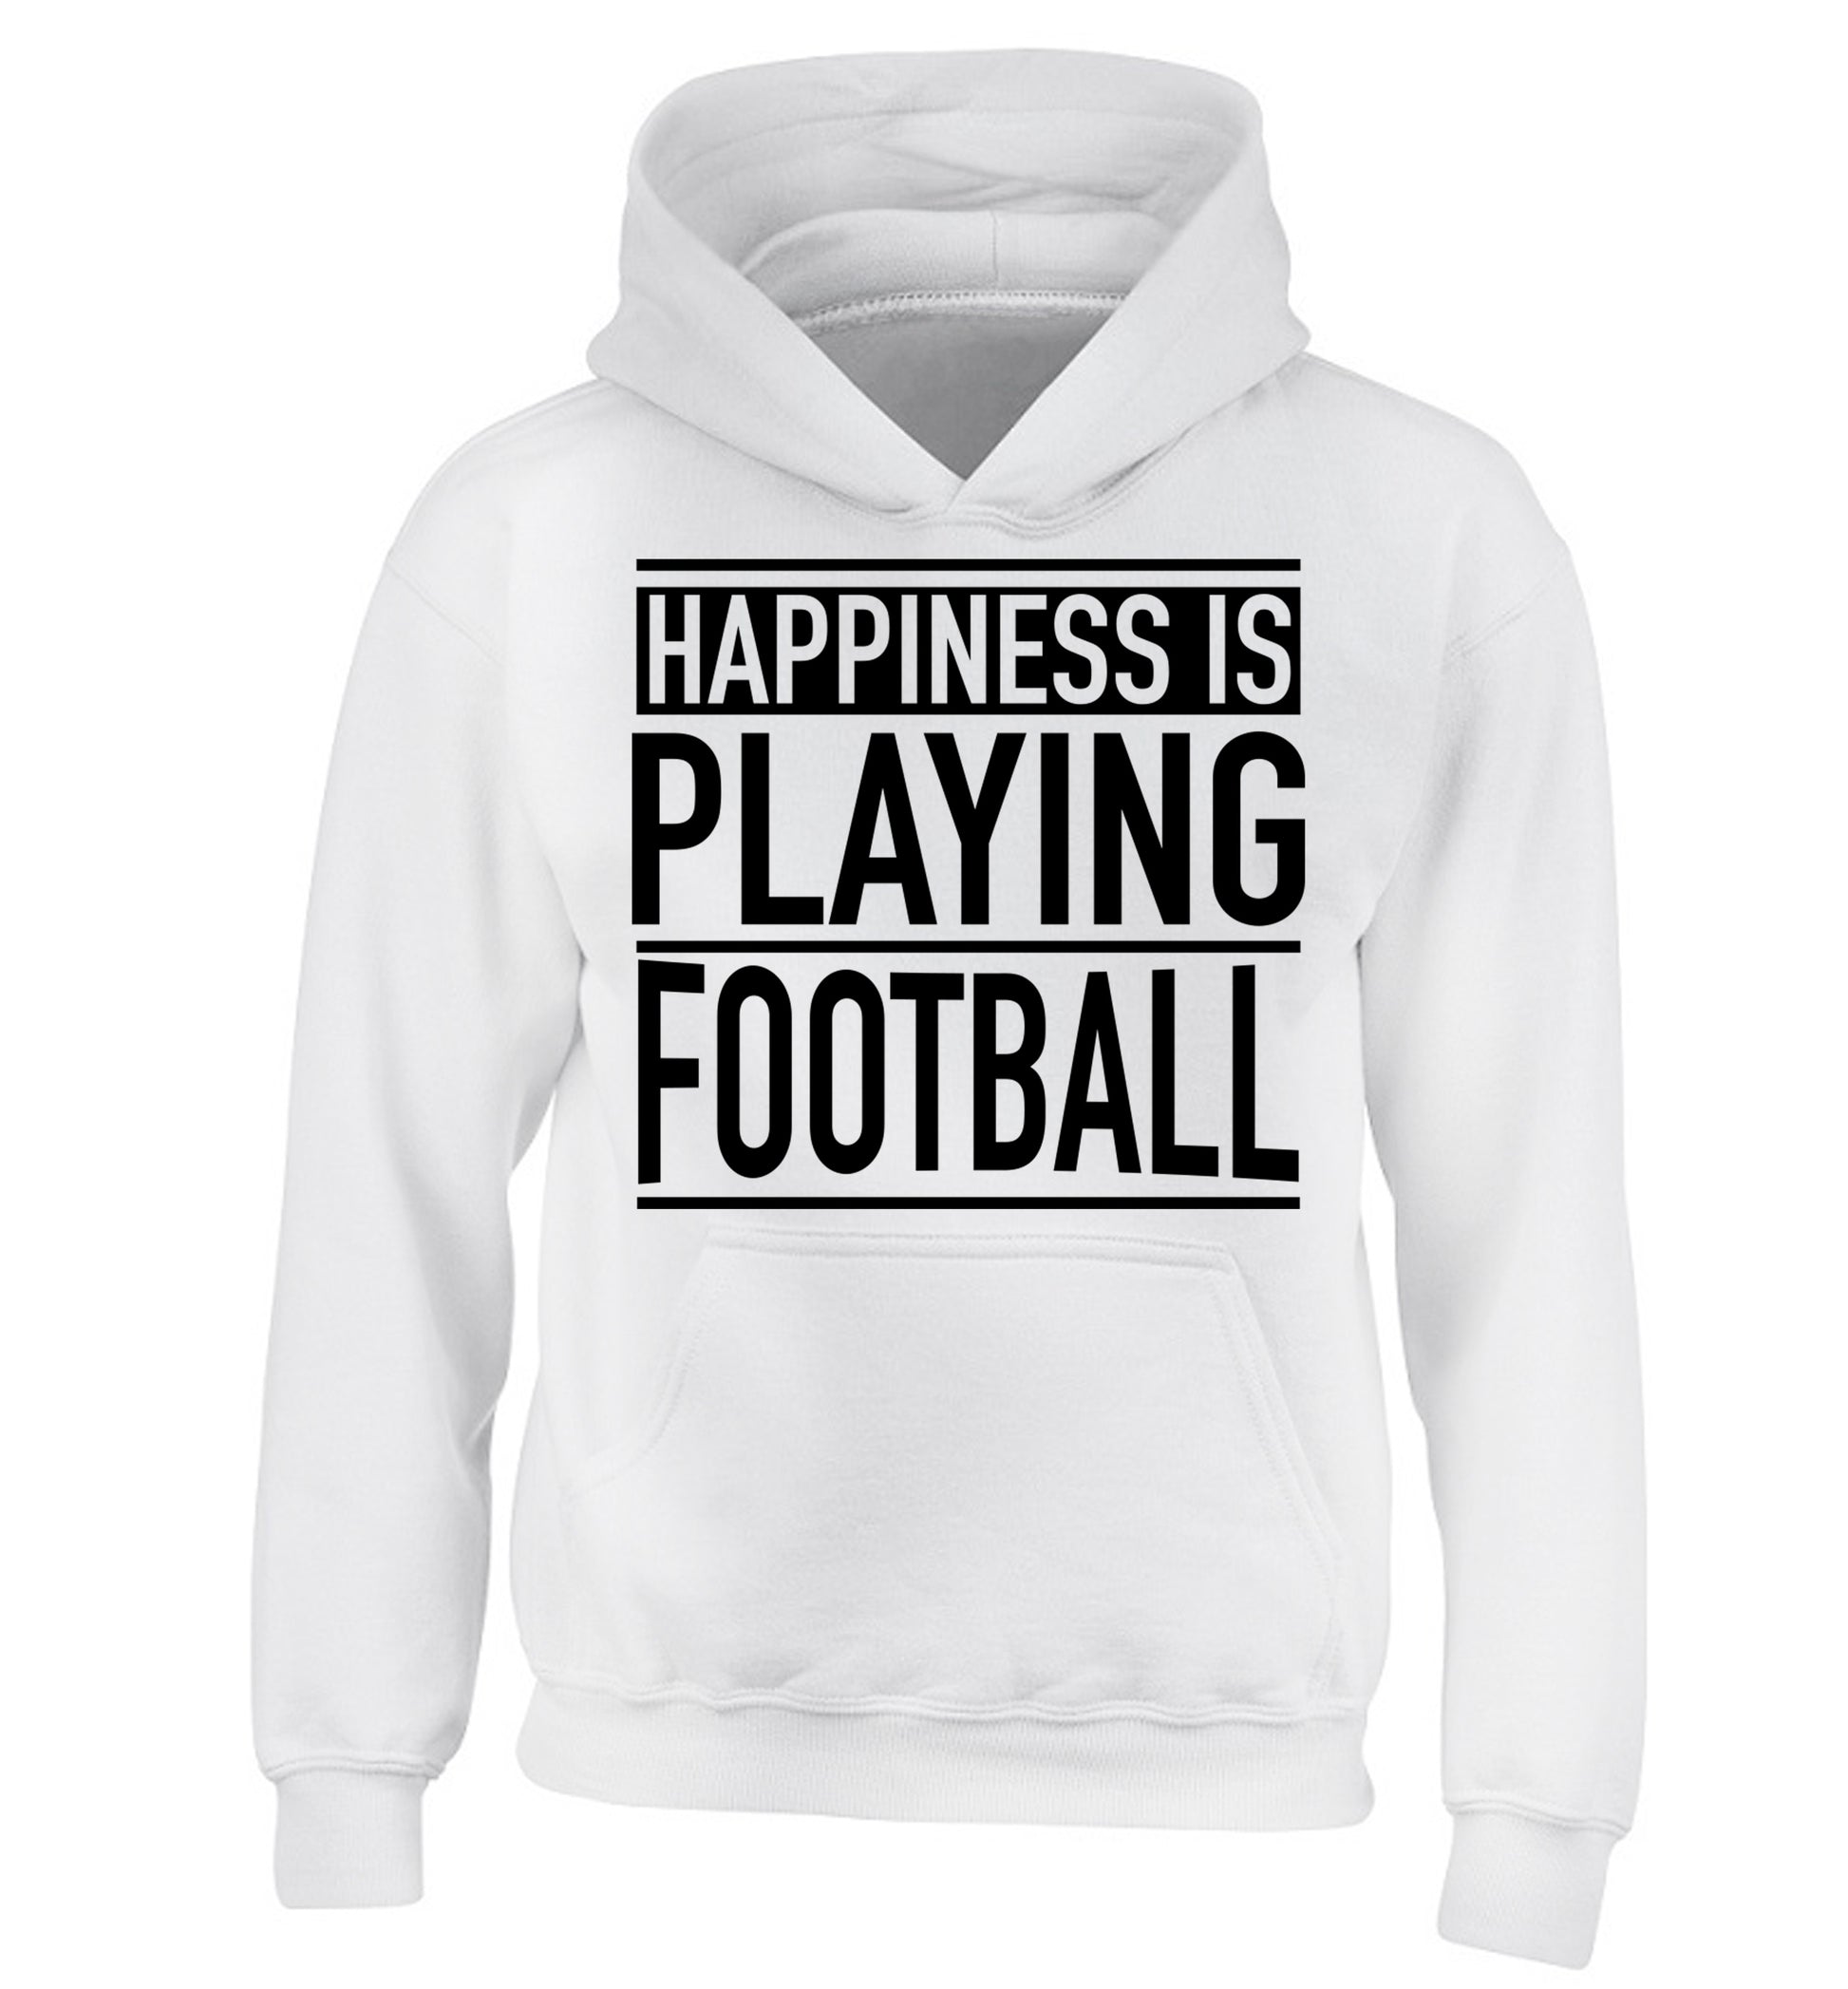 Happiness is playing football children's white hoodie 12-14 Years